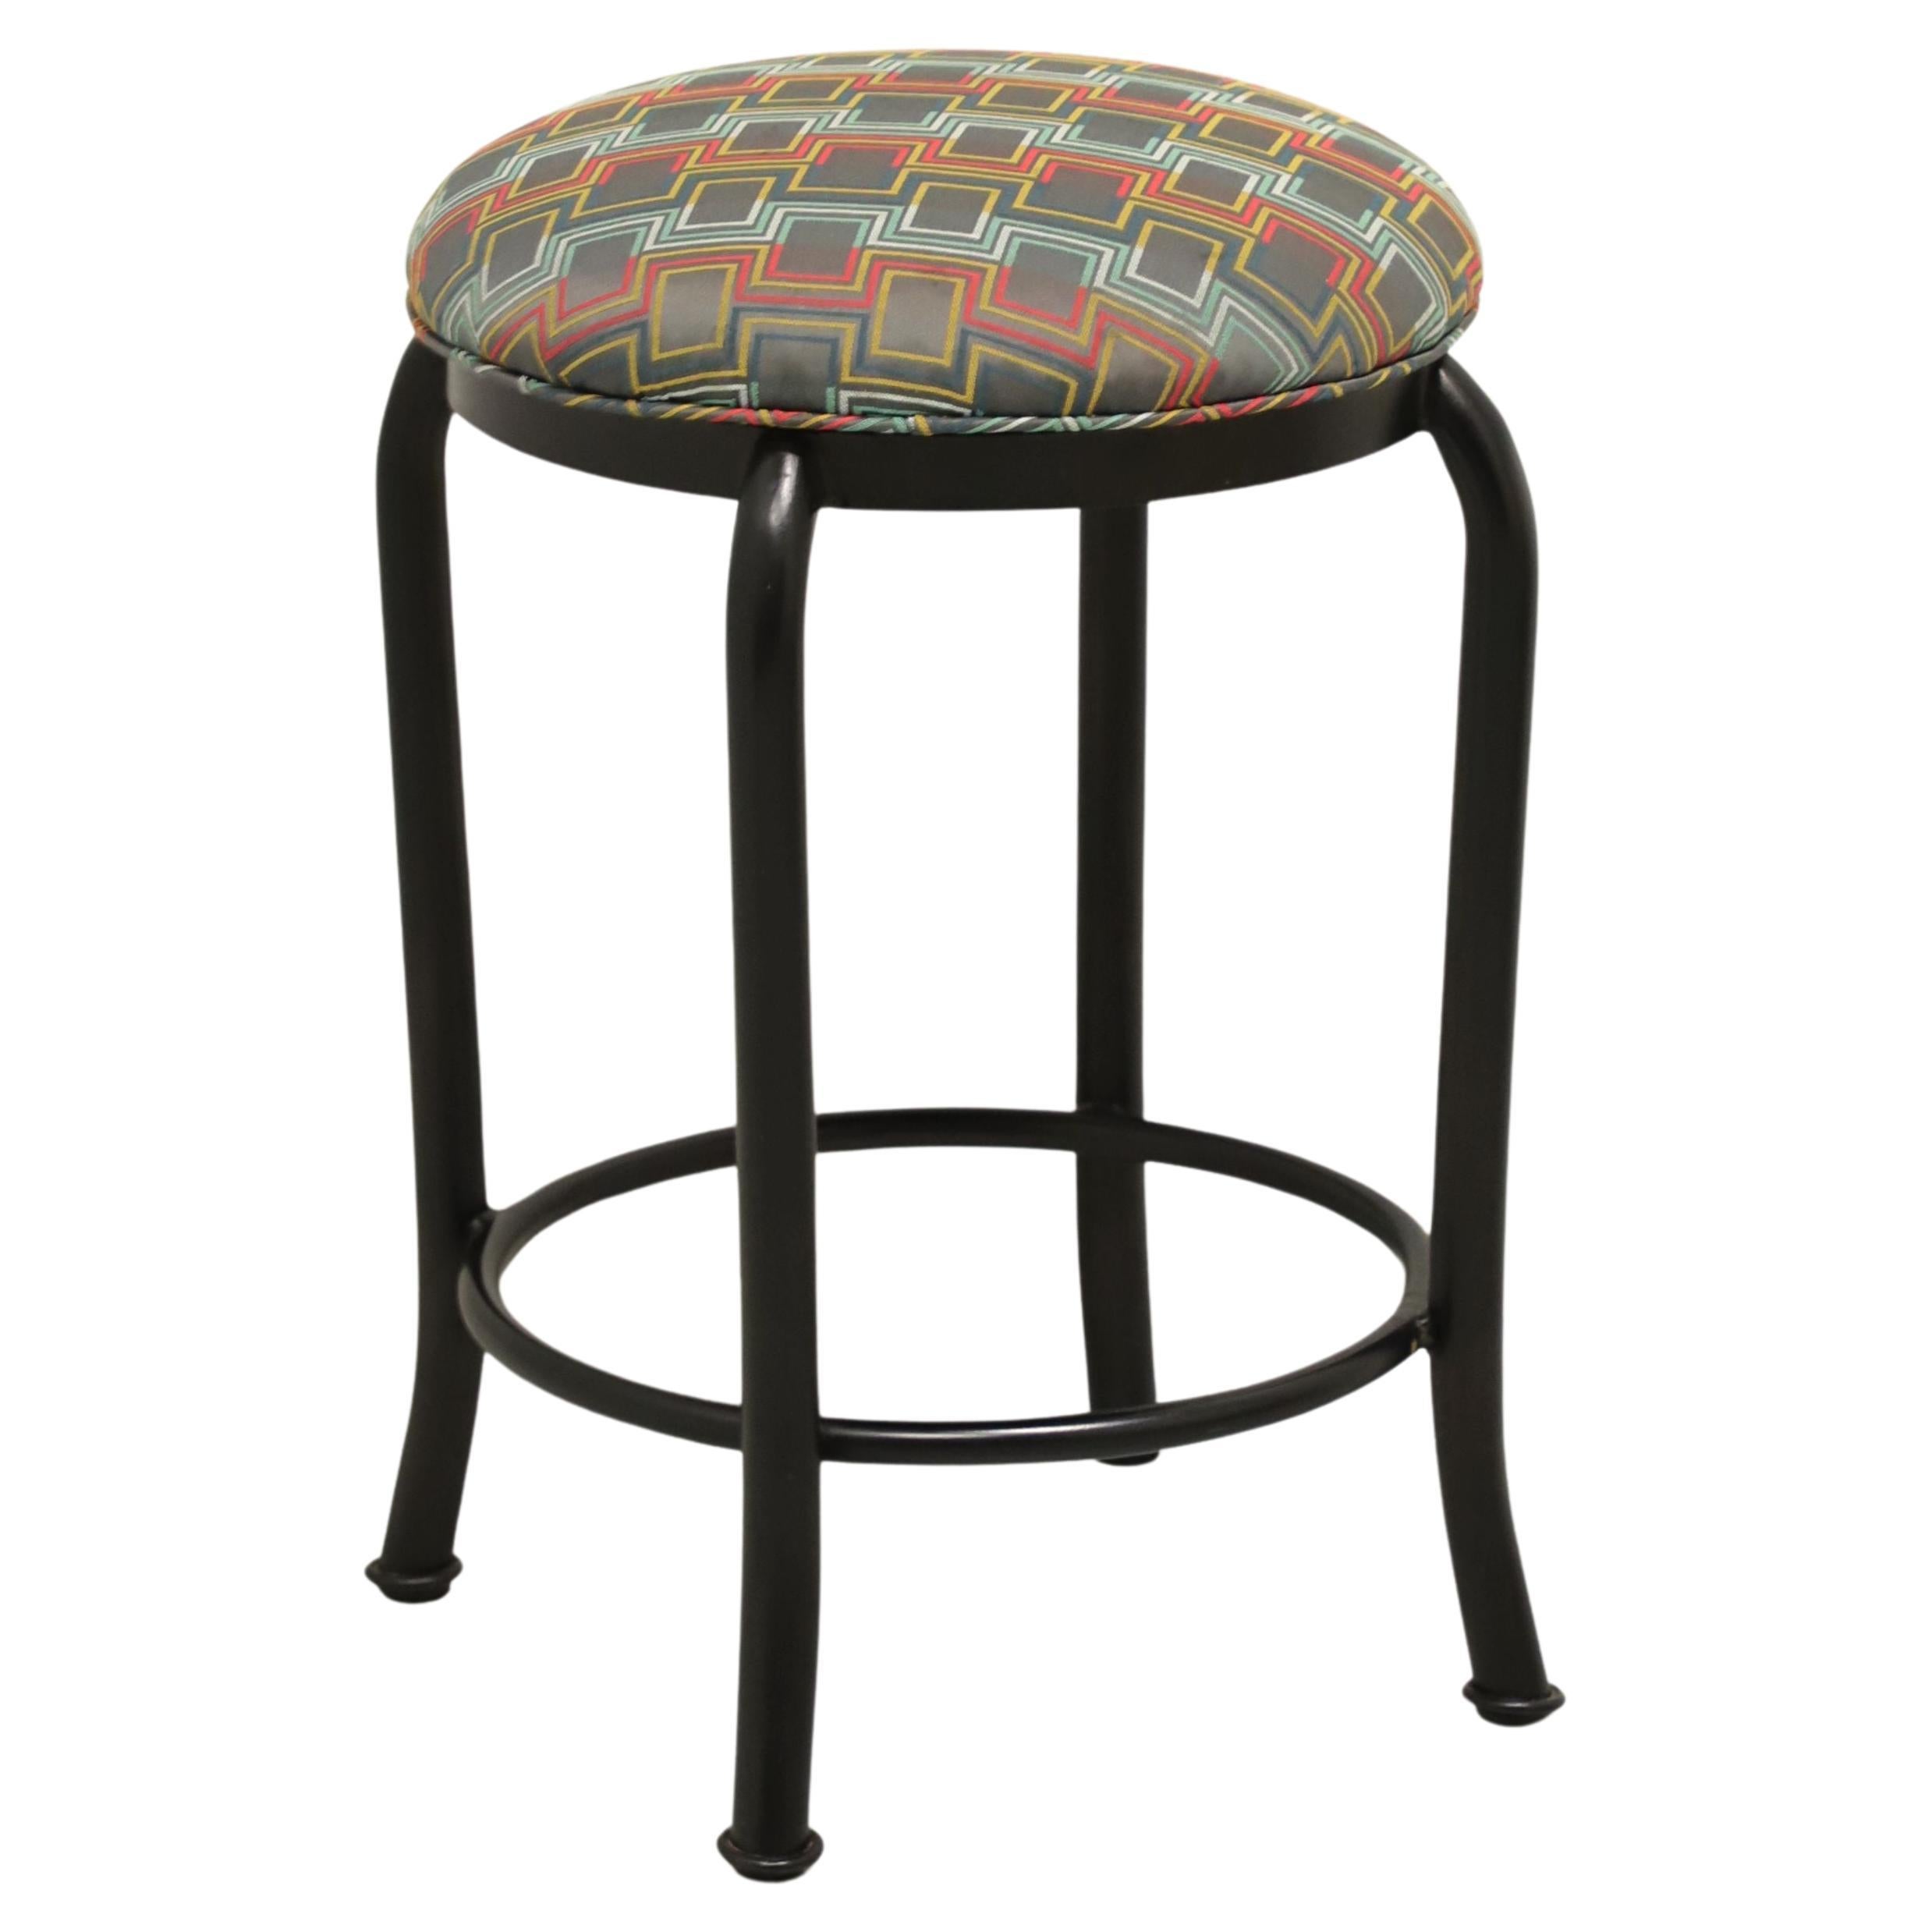 Late 20th Century Transitional Metal Counter-Height Swivel Stool